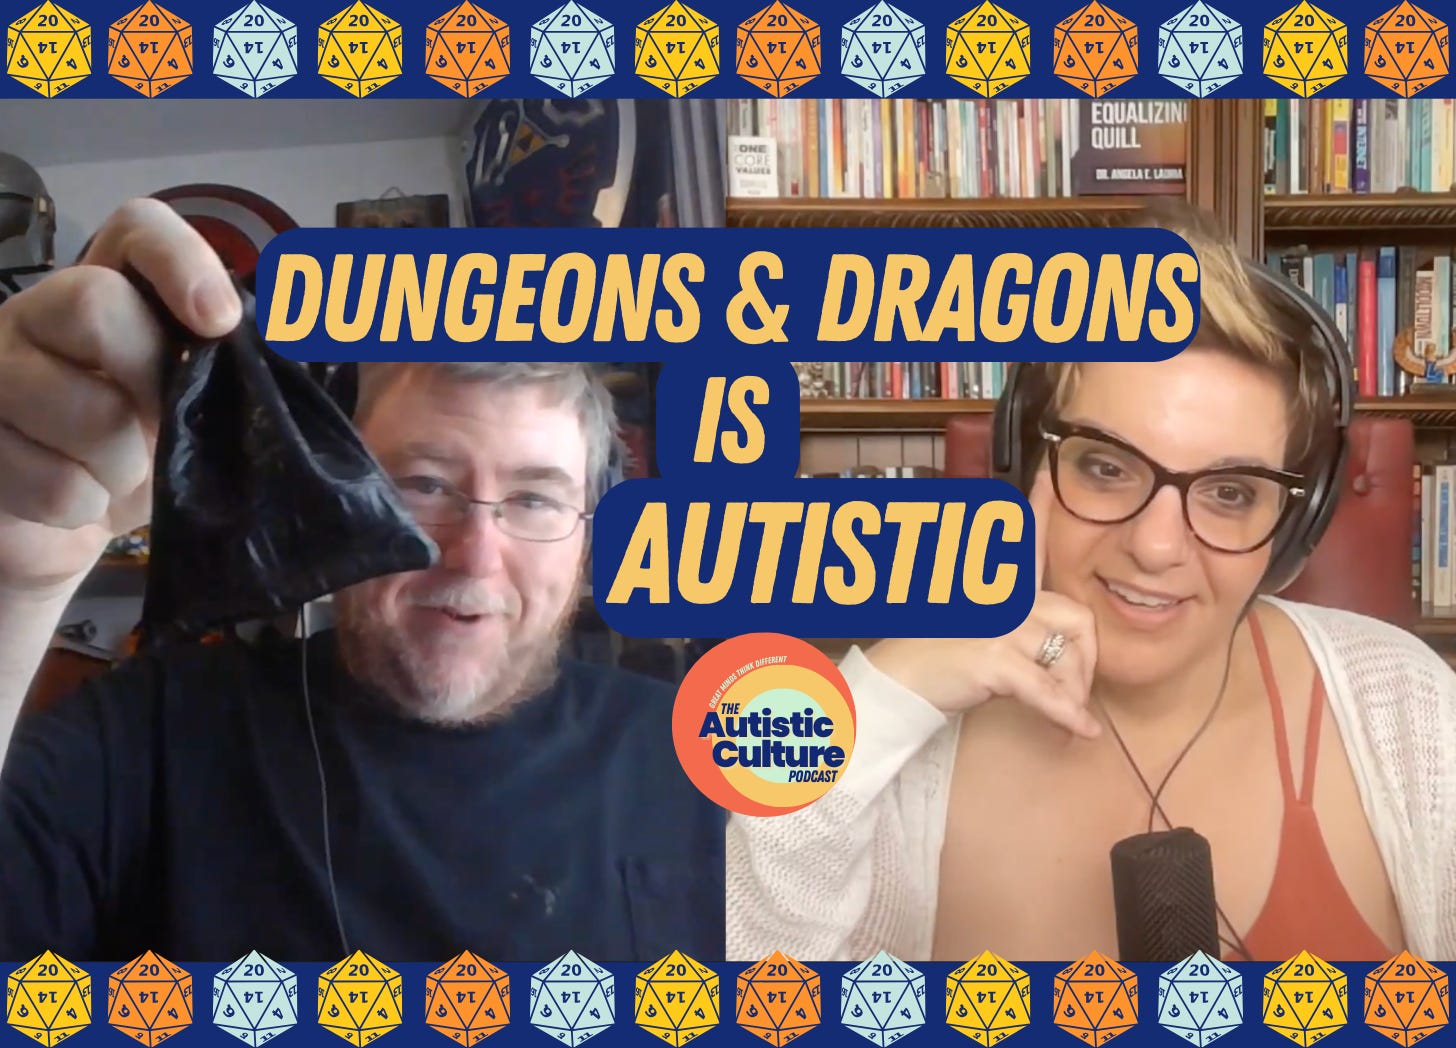 Autistic hosts, Dr. Angela Lauria and Matt Lowry, LPP, discuss Dungeons and dragons is autistic